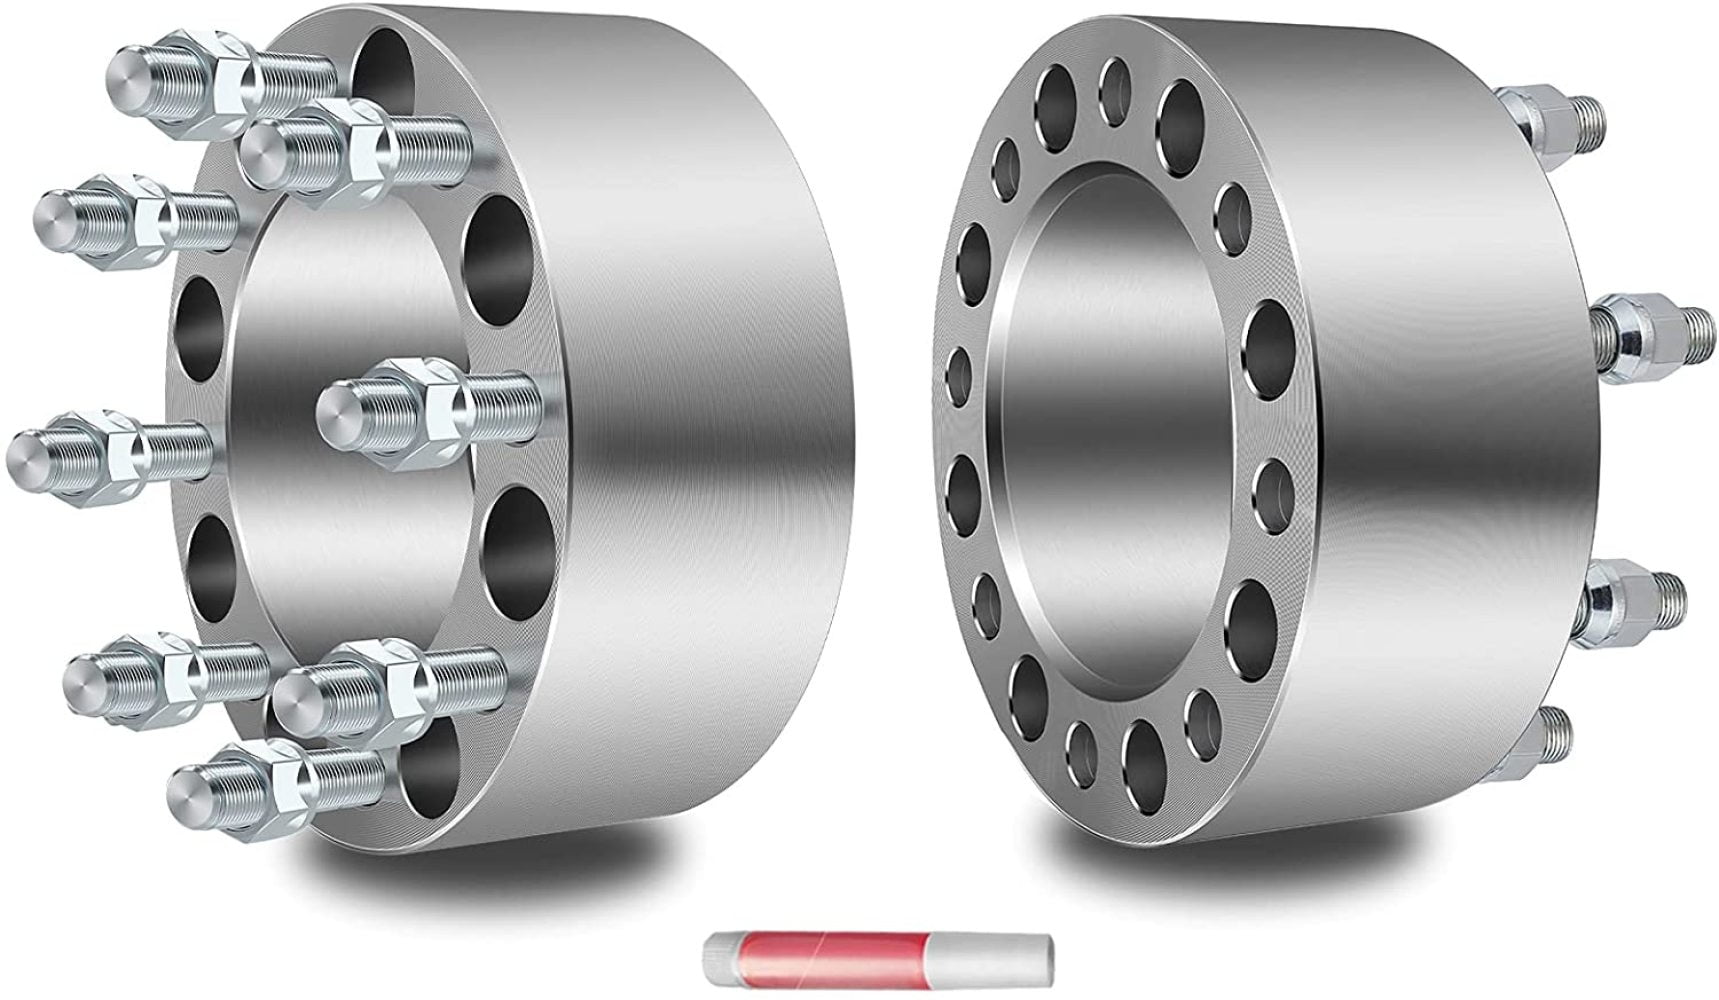 4 8x6.5 to 8x6.5 3 Inch Wheel Spacers Adapters Fits Chevy Silverado 2500 3500